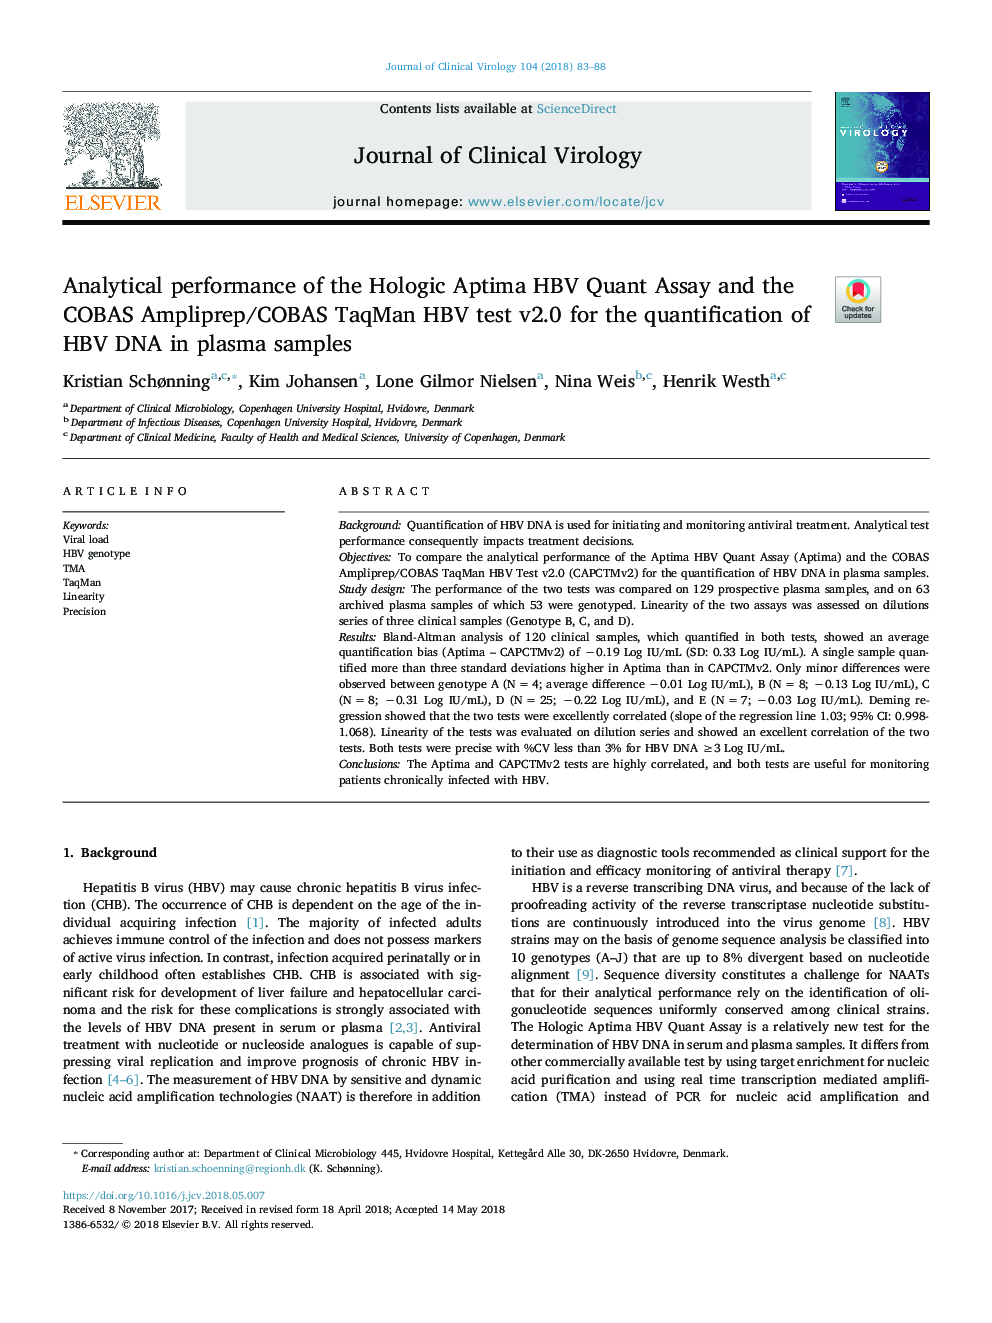 Analytical performance of the Hologic Aptima HBV Quant Assay and the COBAS Ampliprep/COBAS TaqMan HBV test v2.0 for the quantification of HBV DNA in plasma samples